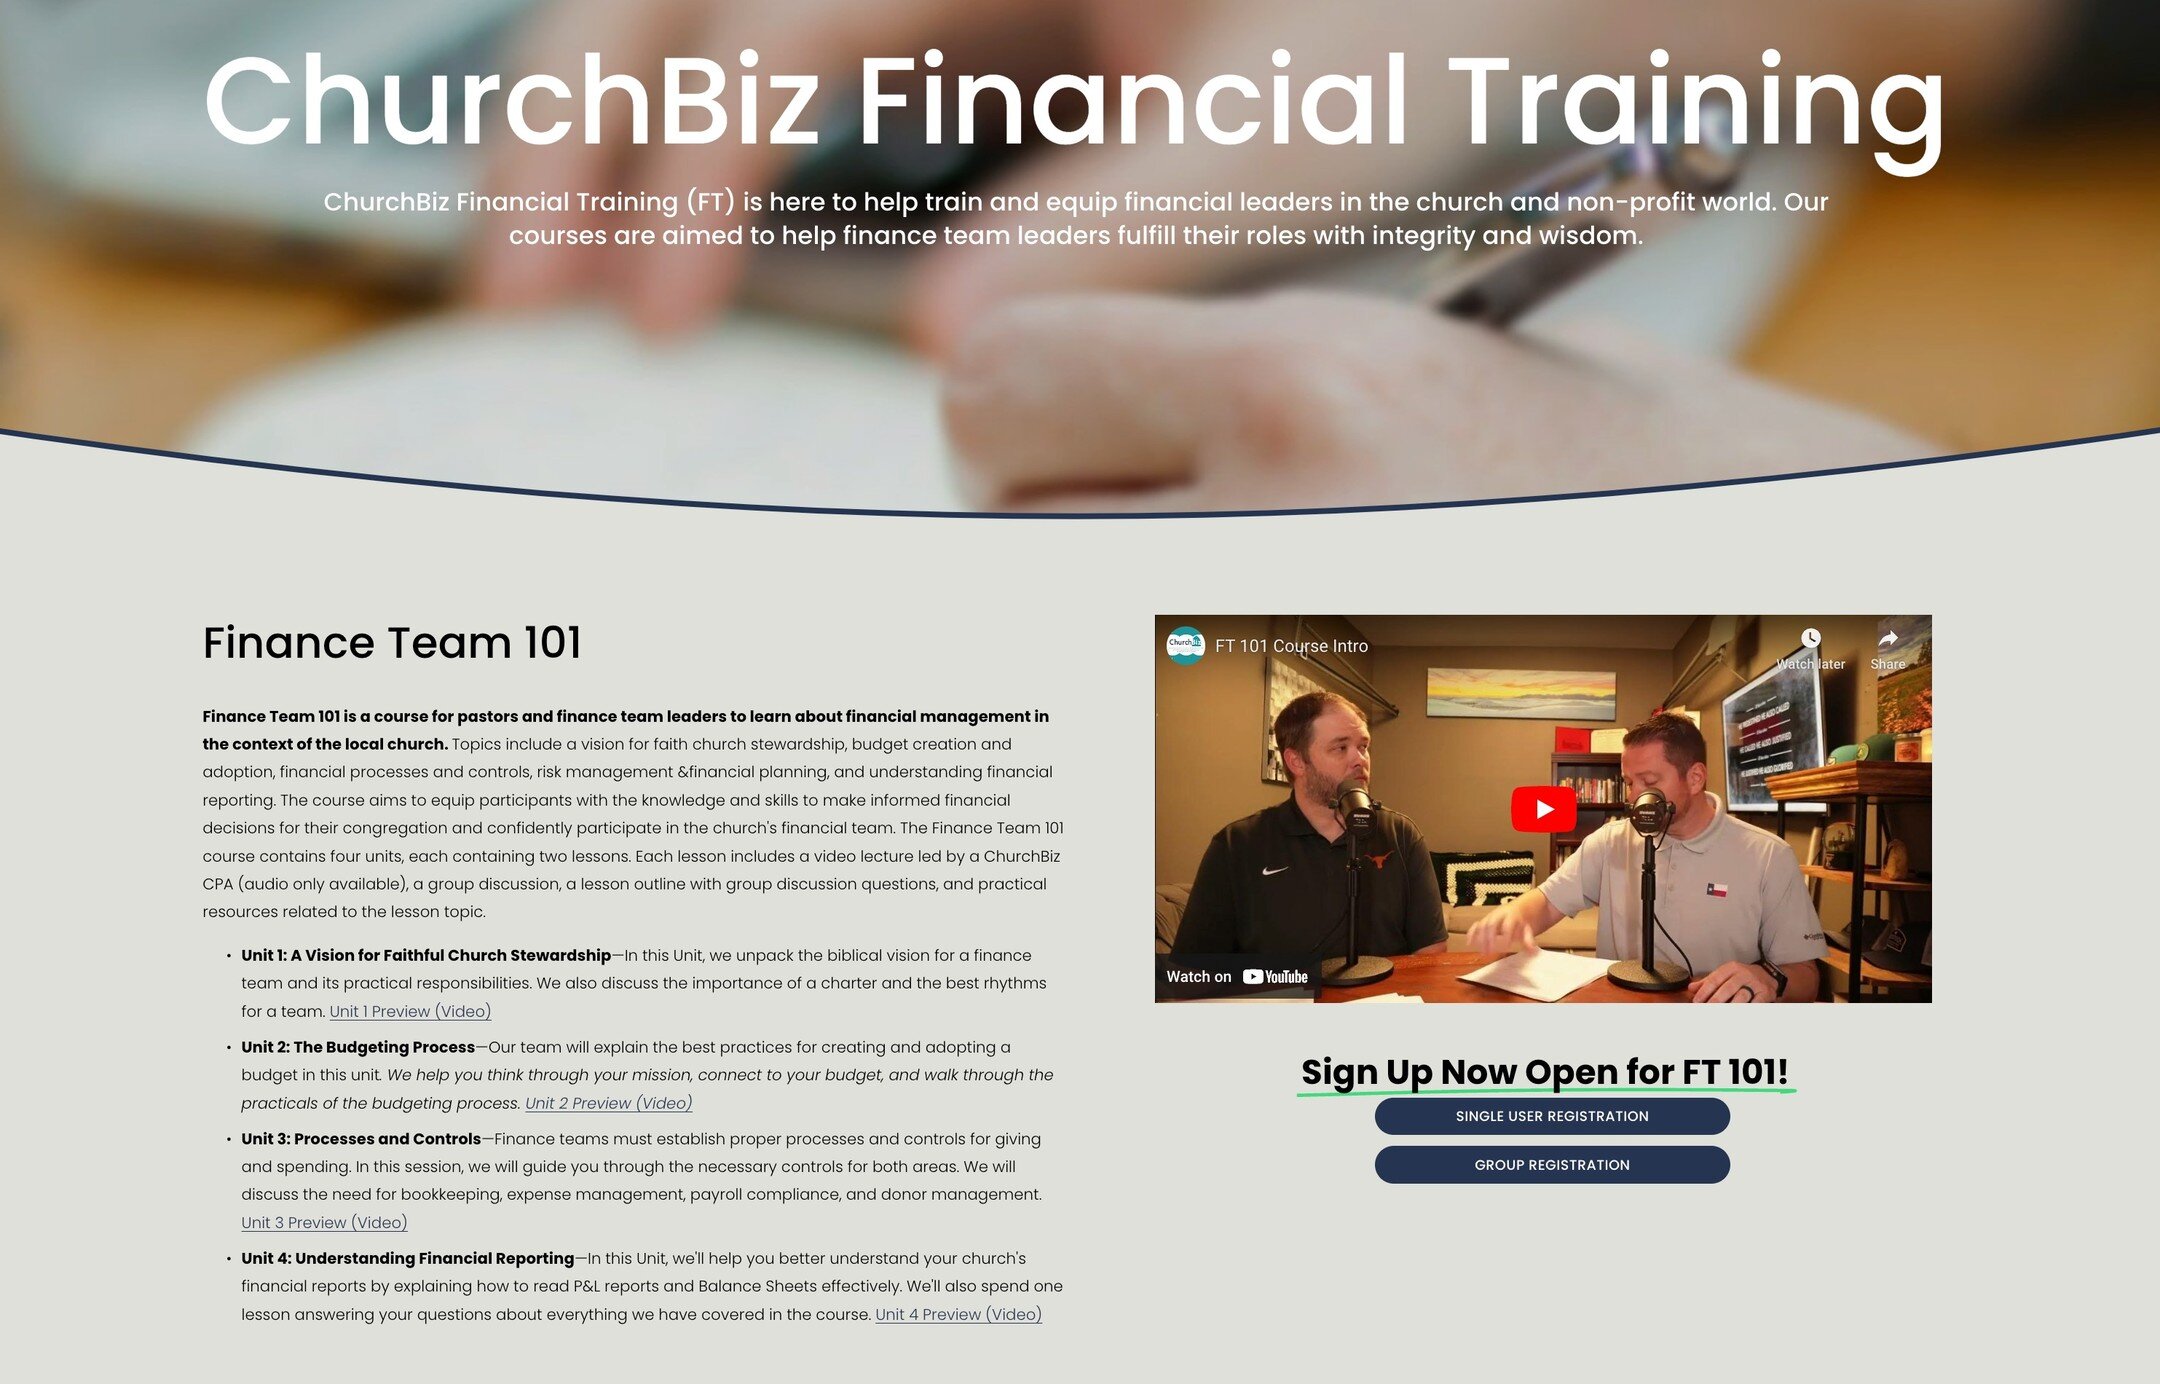 ChurhBiz is launching our first course in May to help train finance teams. More info on our website! Link in Bio.